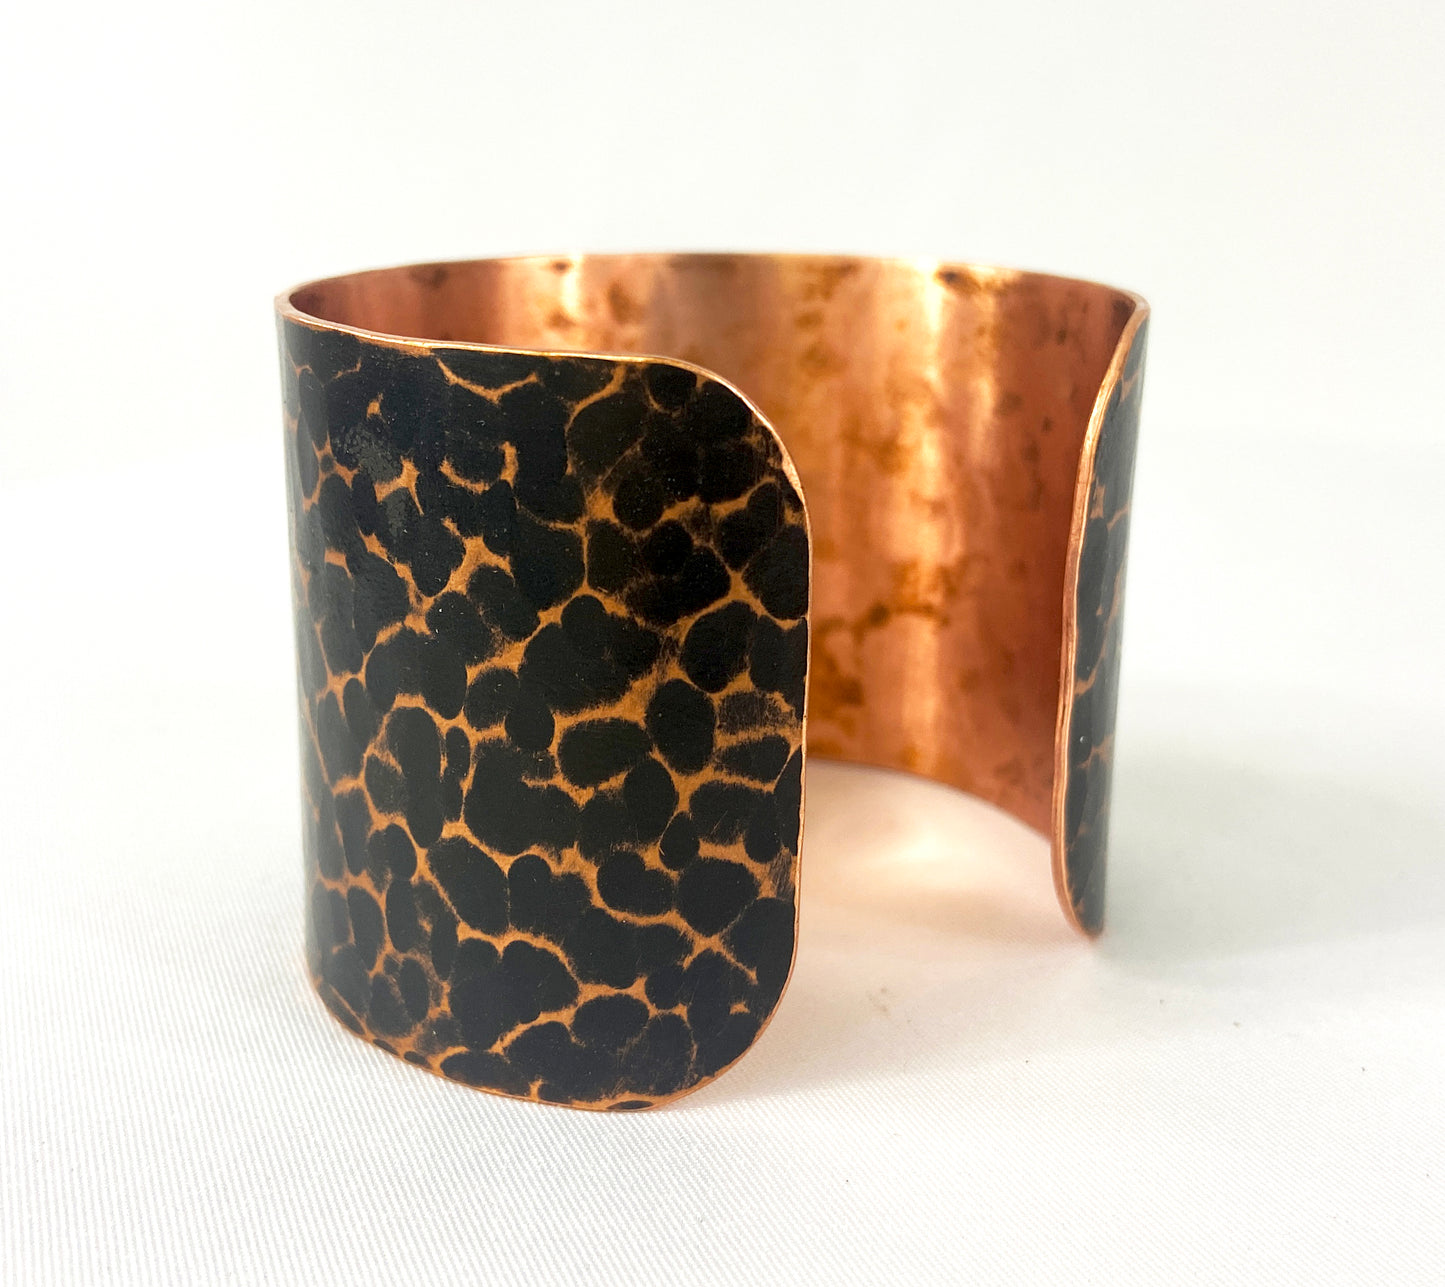 Hammered Copper Cuff with Antique Patina